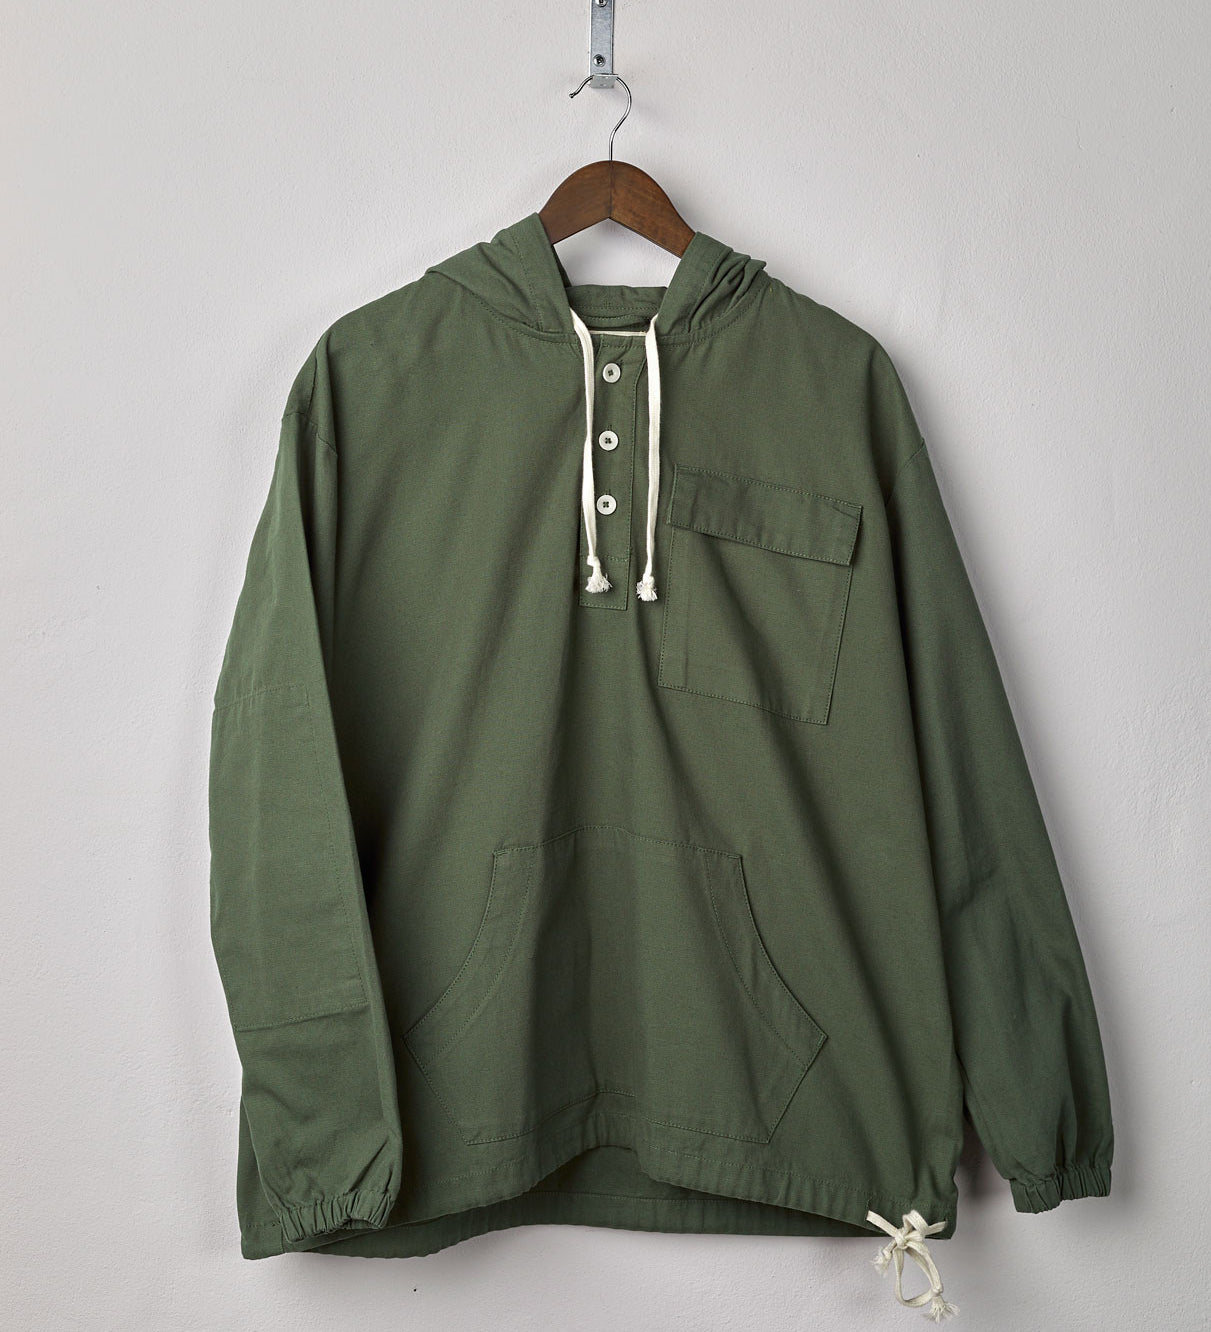 Front view of 'coriander-green' coloured buttoned smock from Uskees with deep front pockets. Presented on hanger.